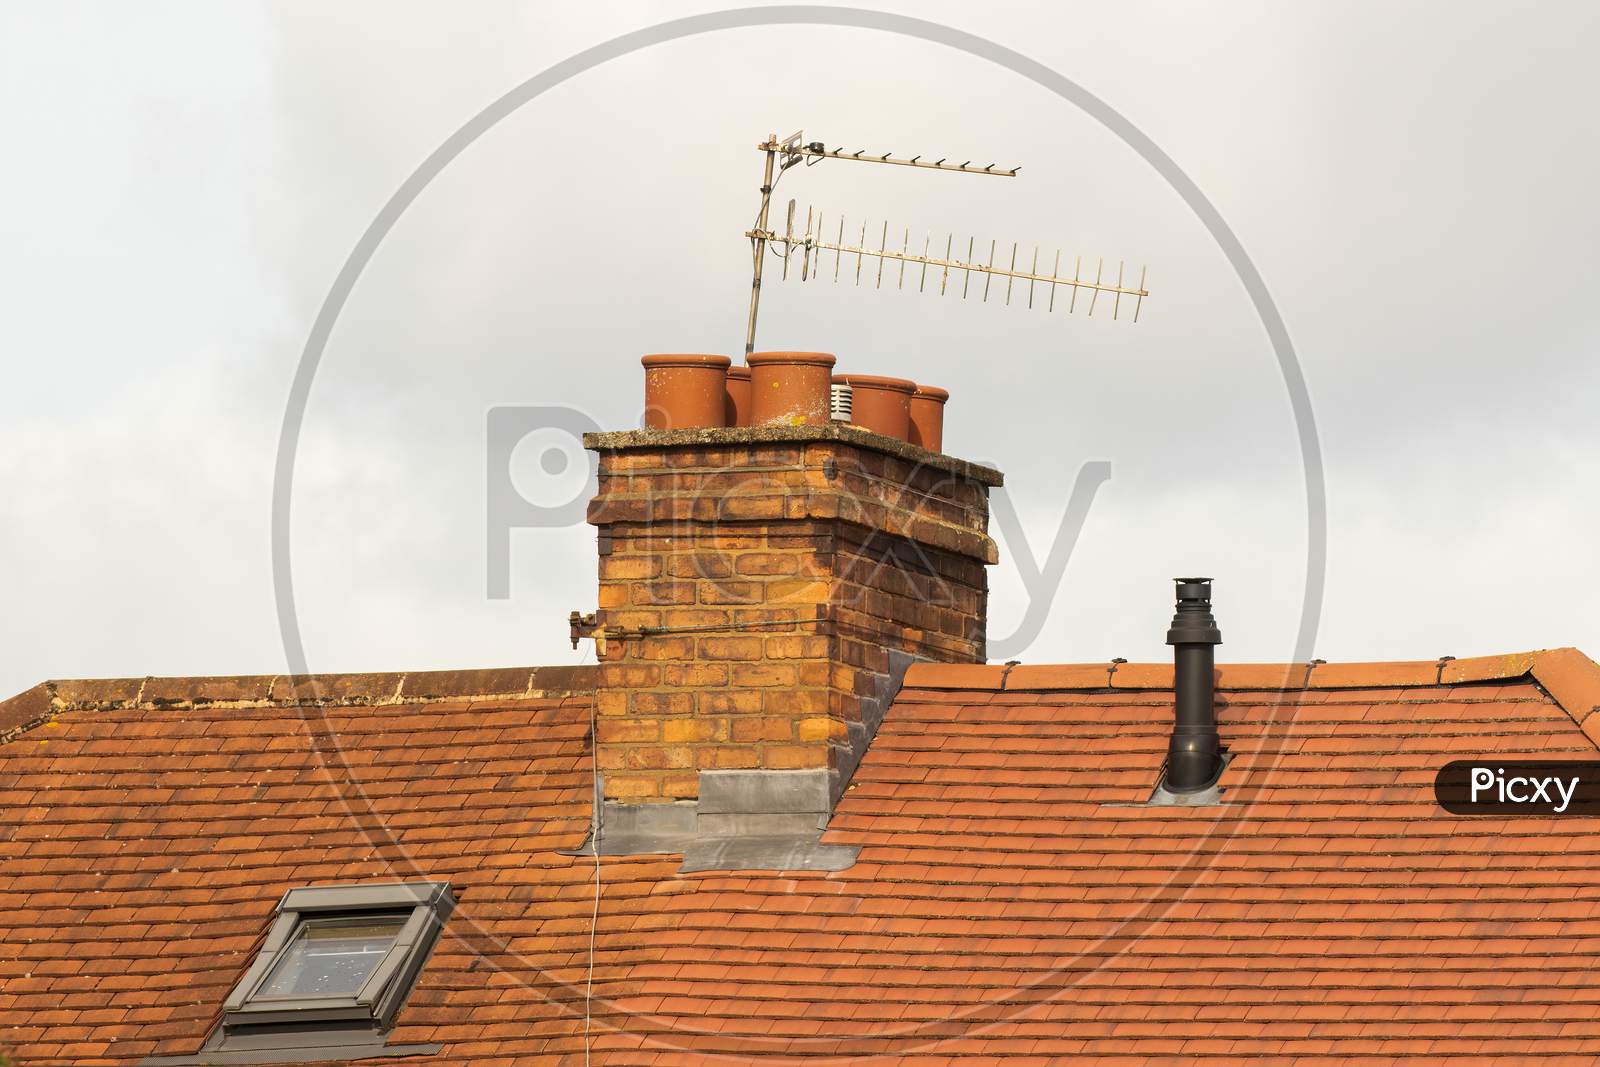 Brick Chimney Stack And TV Aerials On English Rooftop